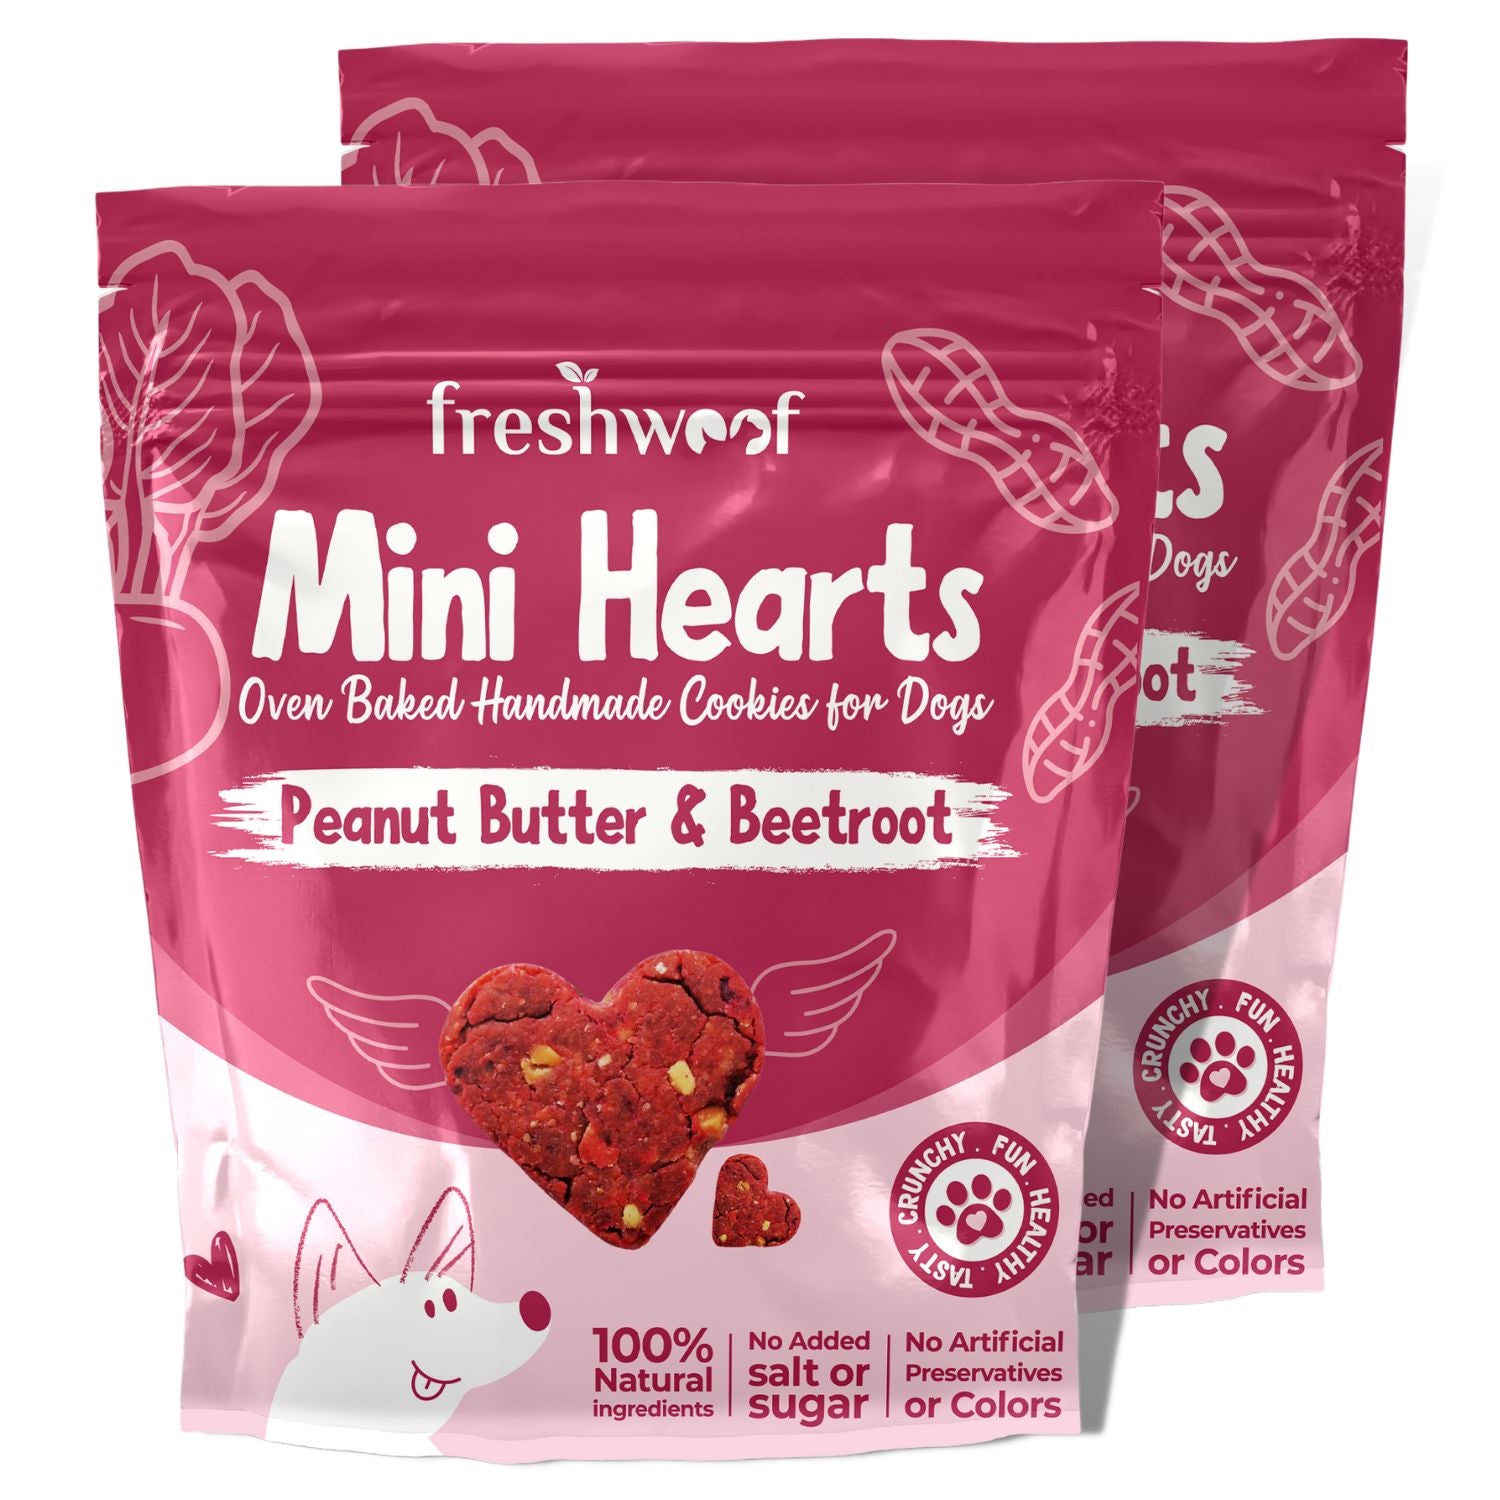 Freshwoof - Mini Hearts Handmade Cookies for Dogs (Peanut Butter & Beetroot | Set of 2)